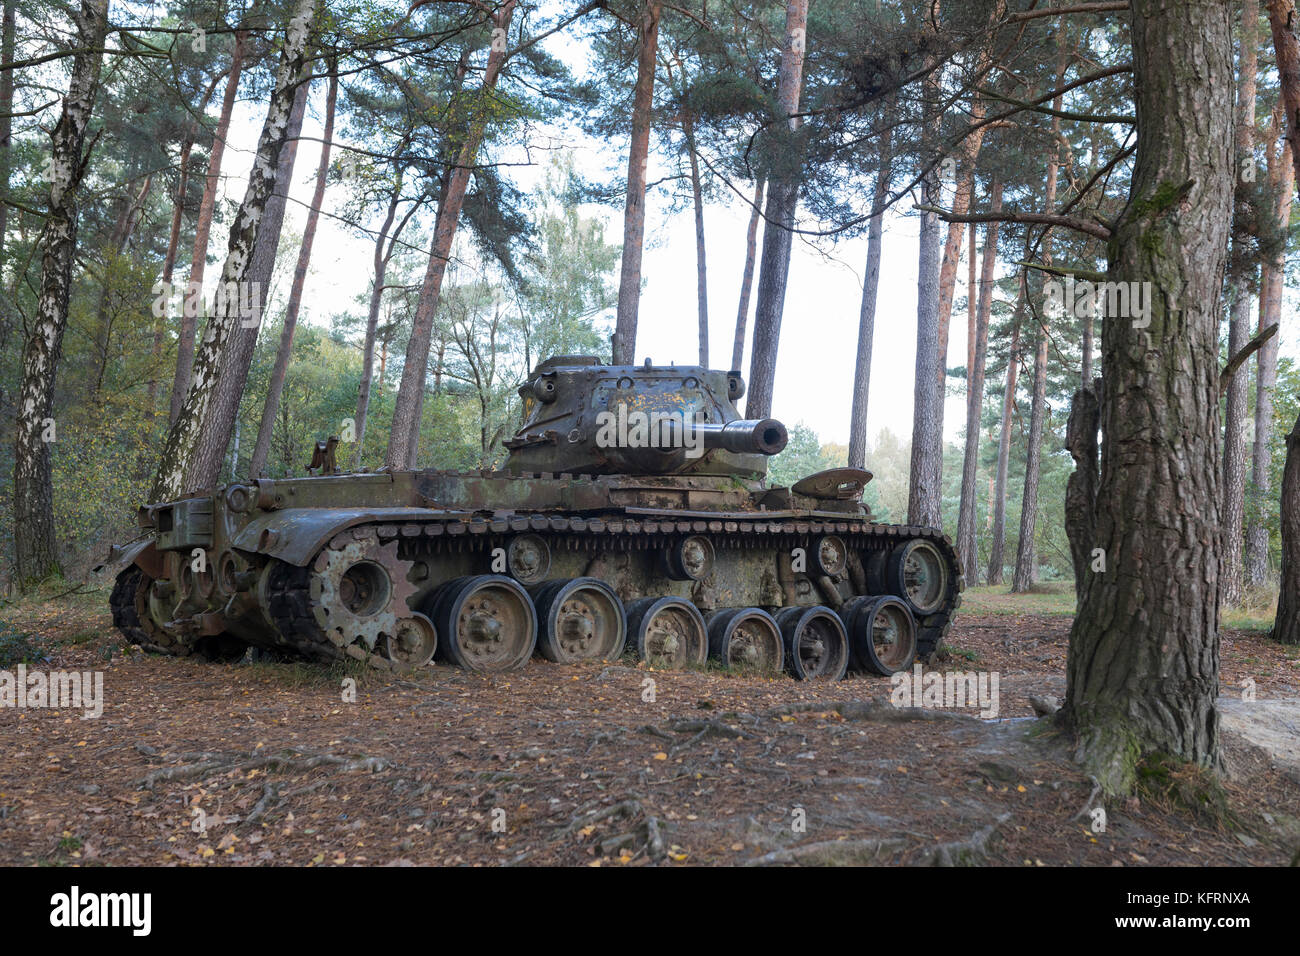 Dumped historical M41 Walker Bulldog tank left behind in forest Stock Photo